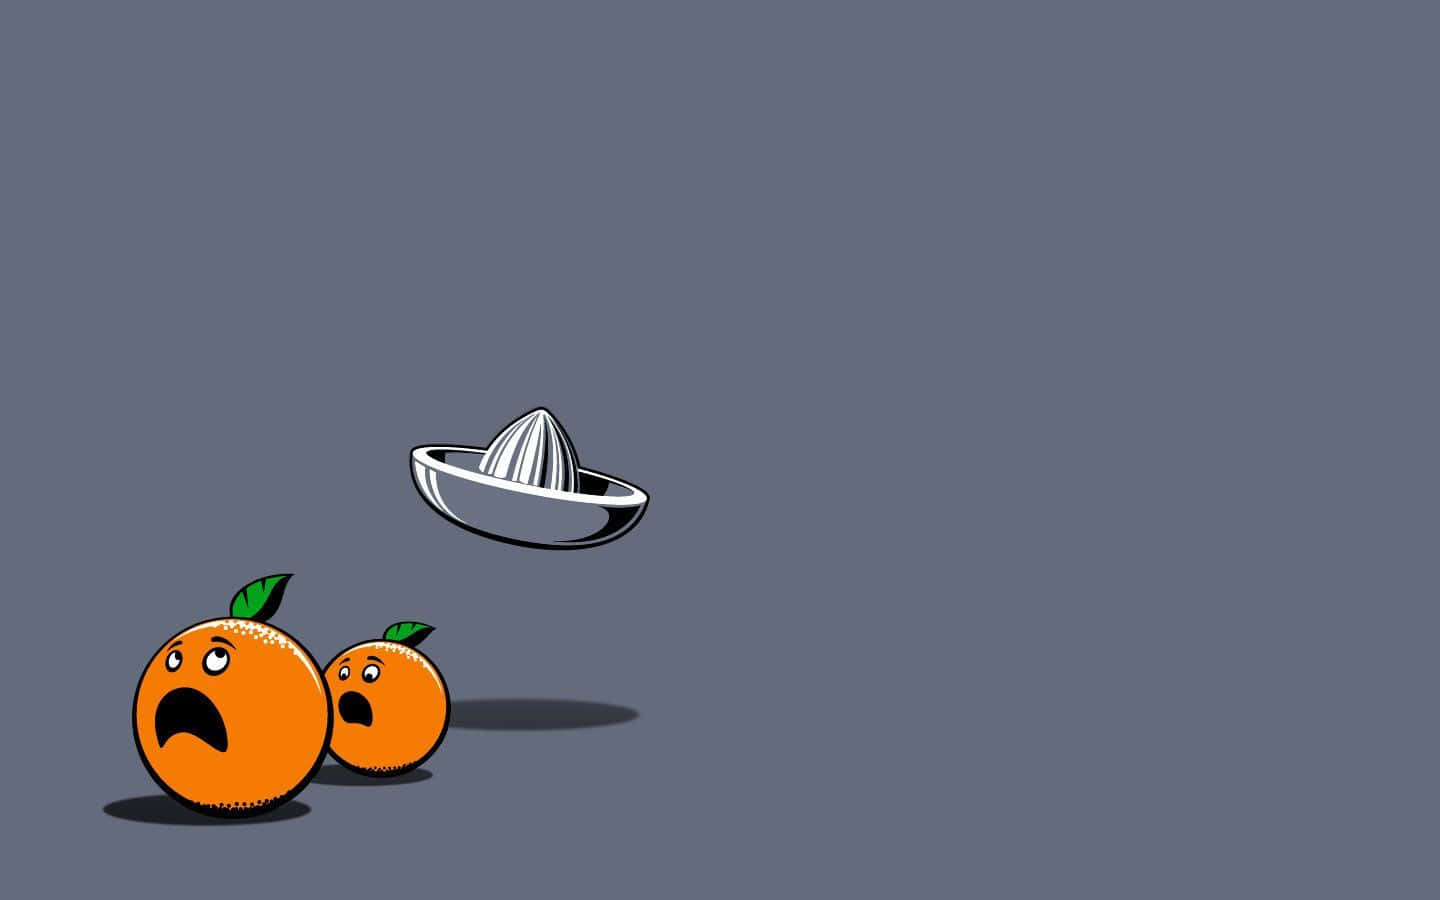 Have you ever heard a pun so bad that it actually becomes funny again? Wallpaper